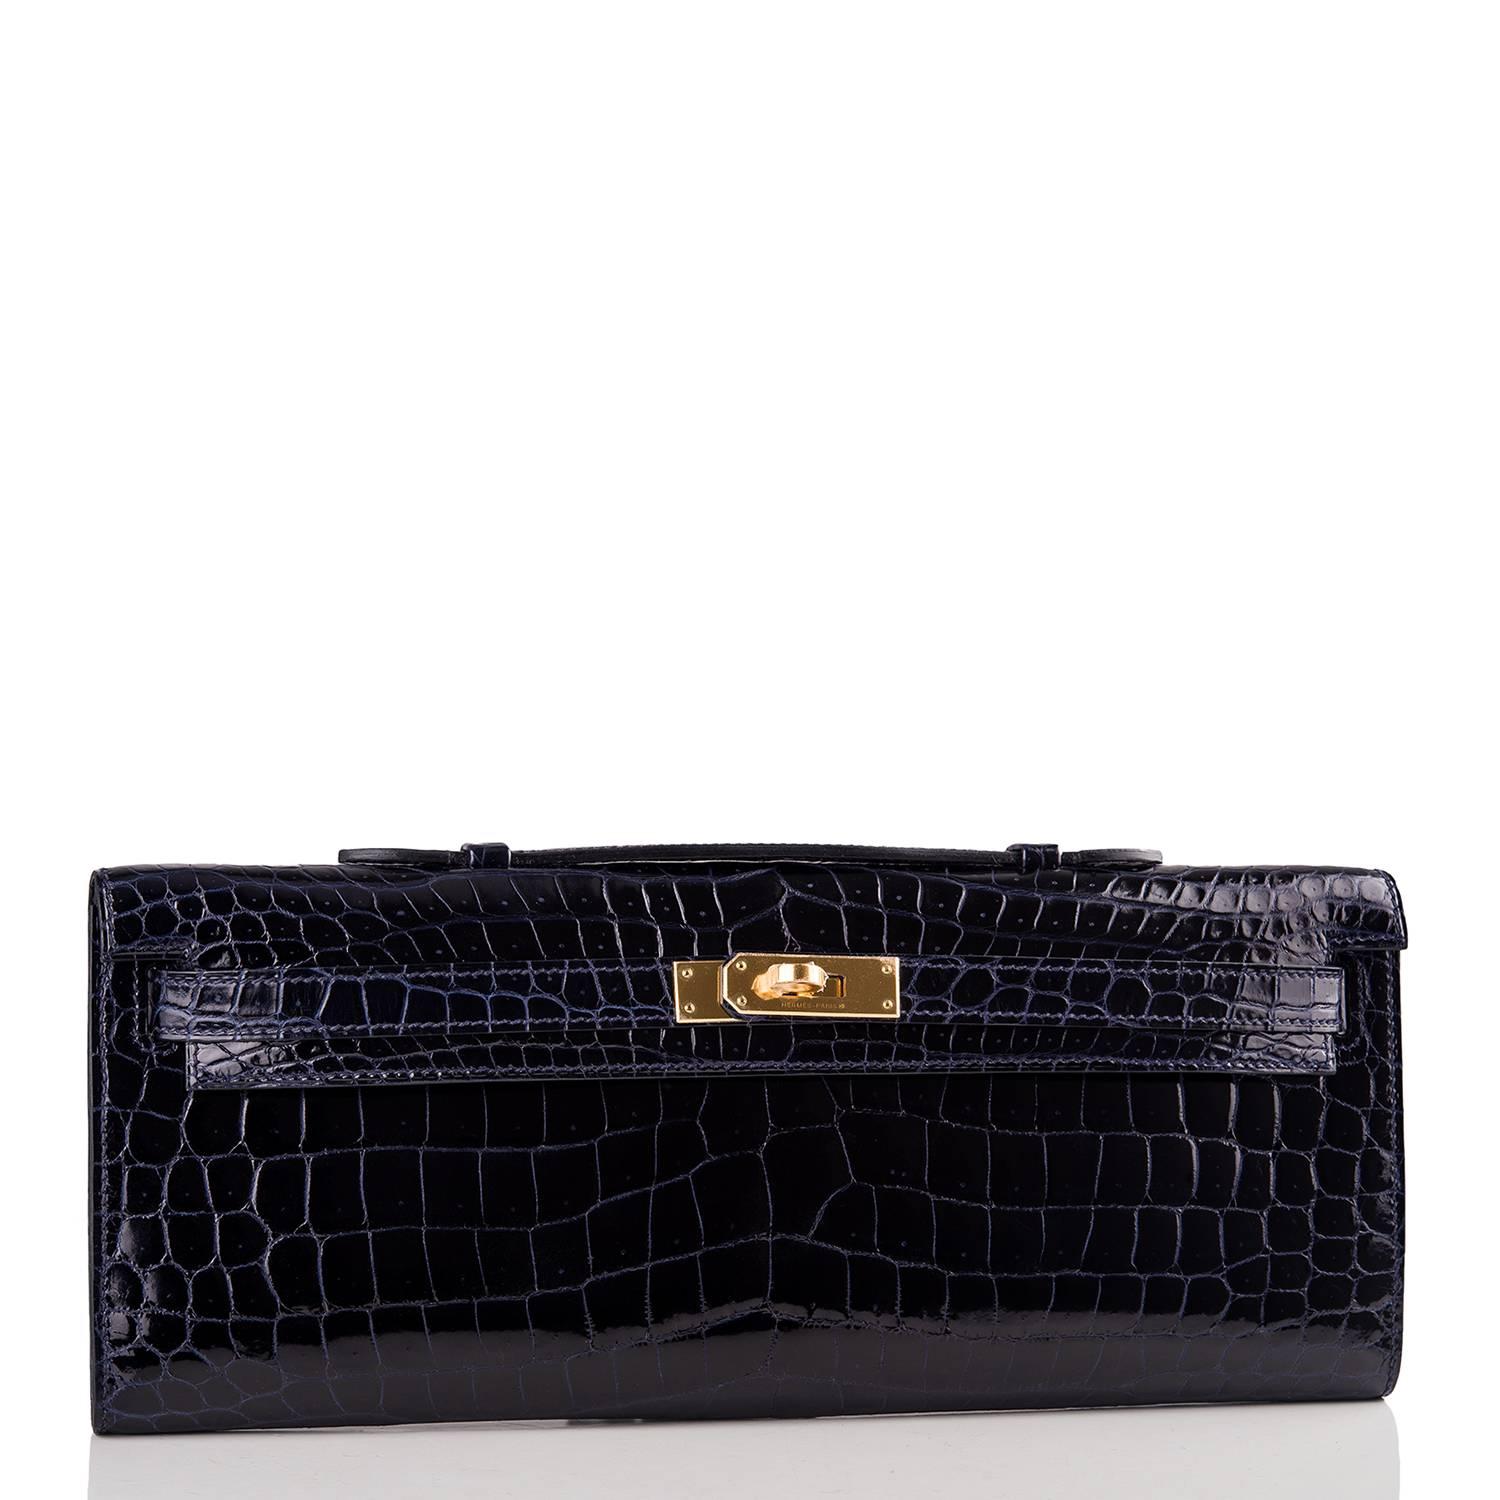 Hermes Blue Marine Kelly Cut of shiny porosus crocodile with gold hardware.

This exotic Kelly Cut has tonal stitching, front straps with a toggle closure and a top flat handle.

The interior is lined with Blue Marine chevre leather and has an open